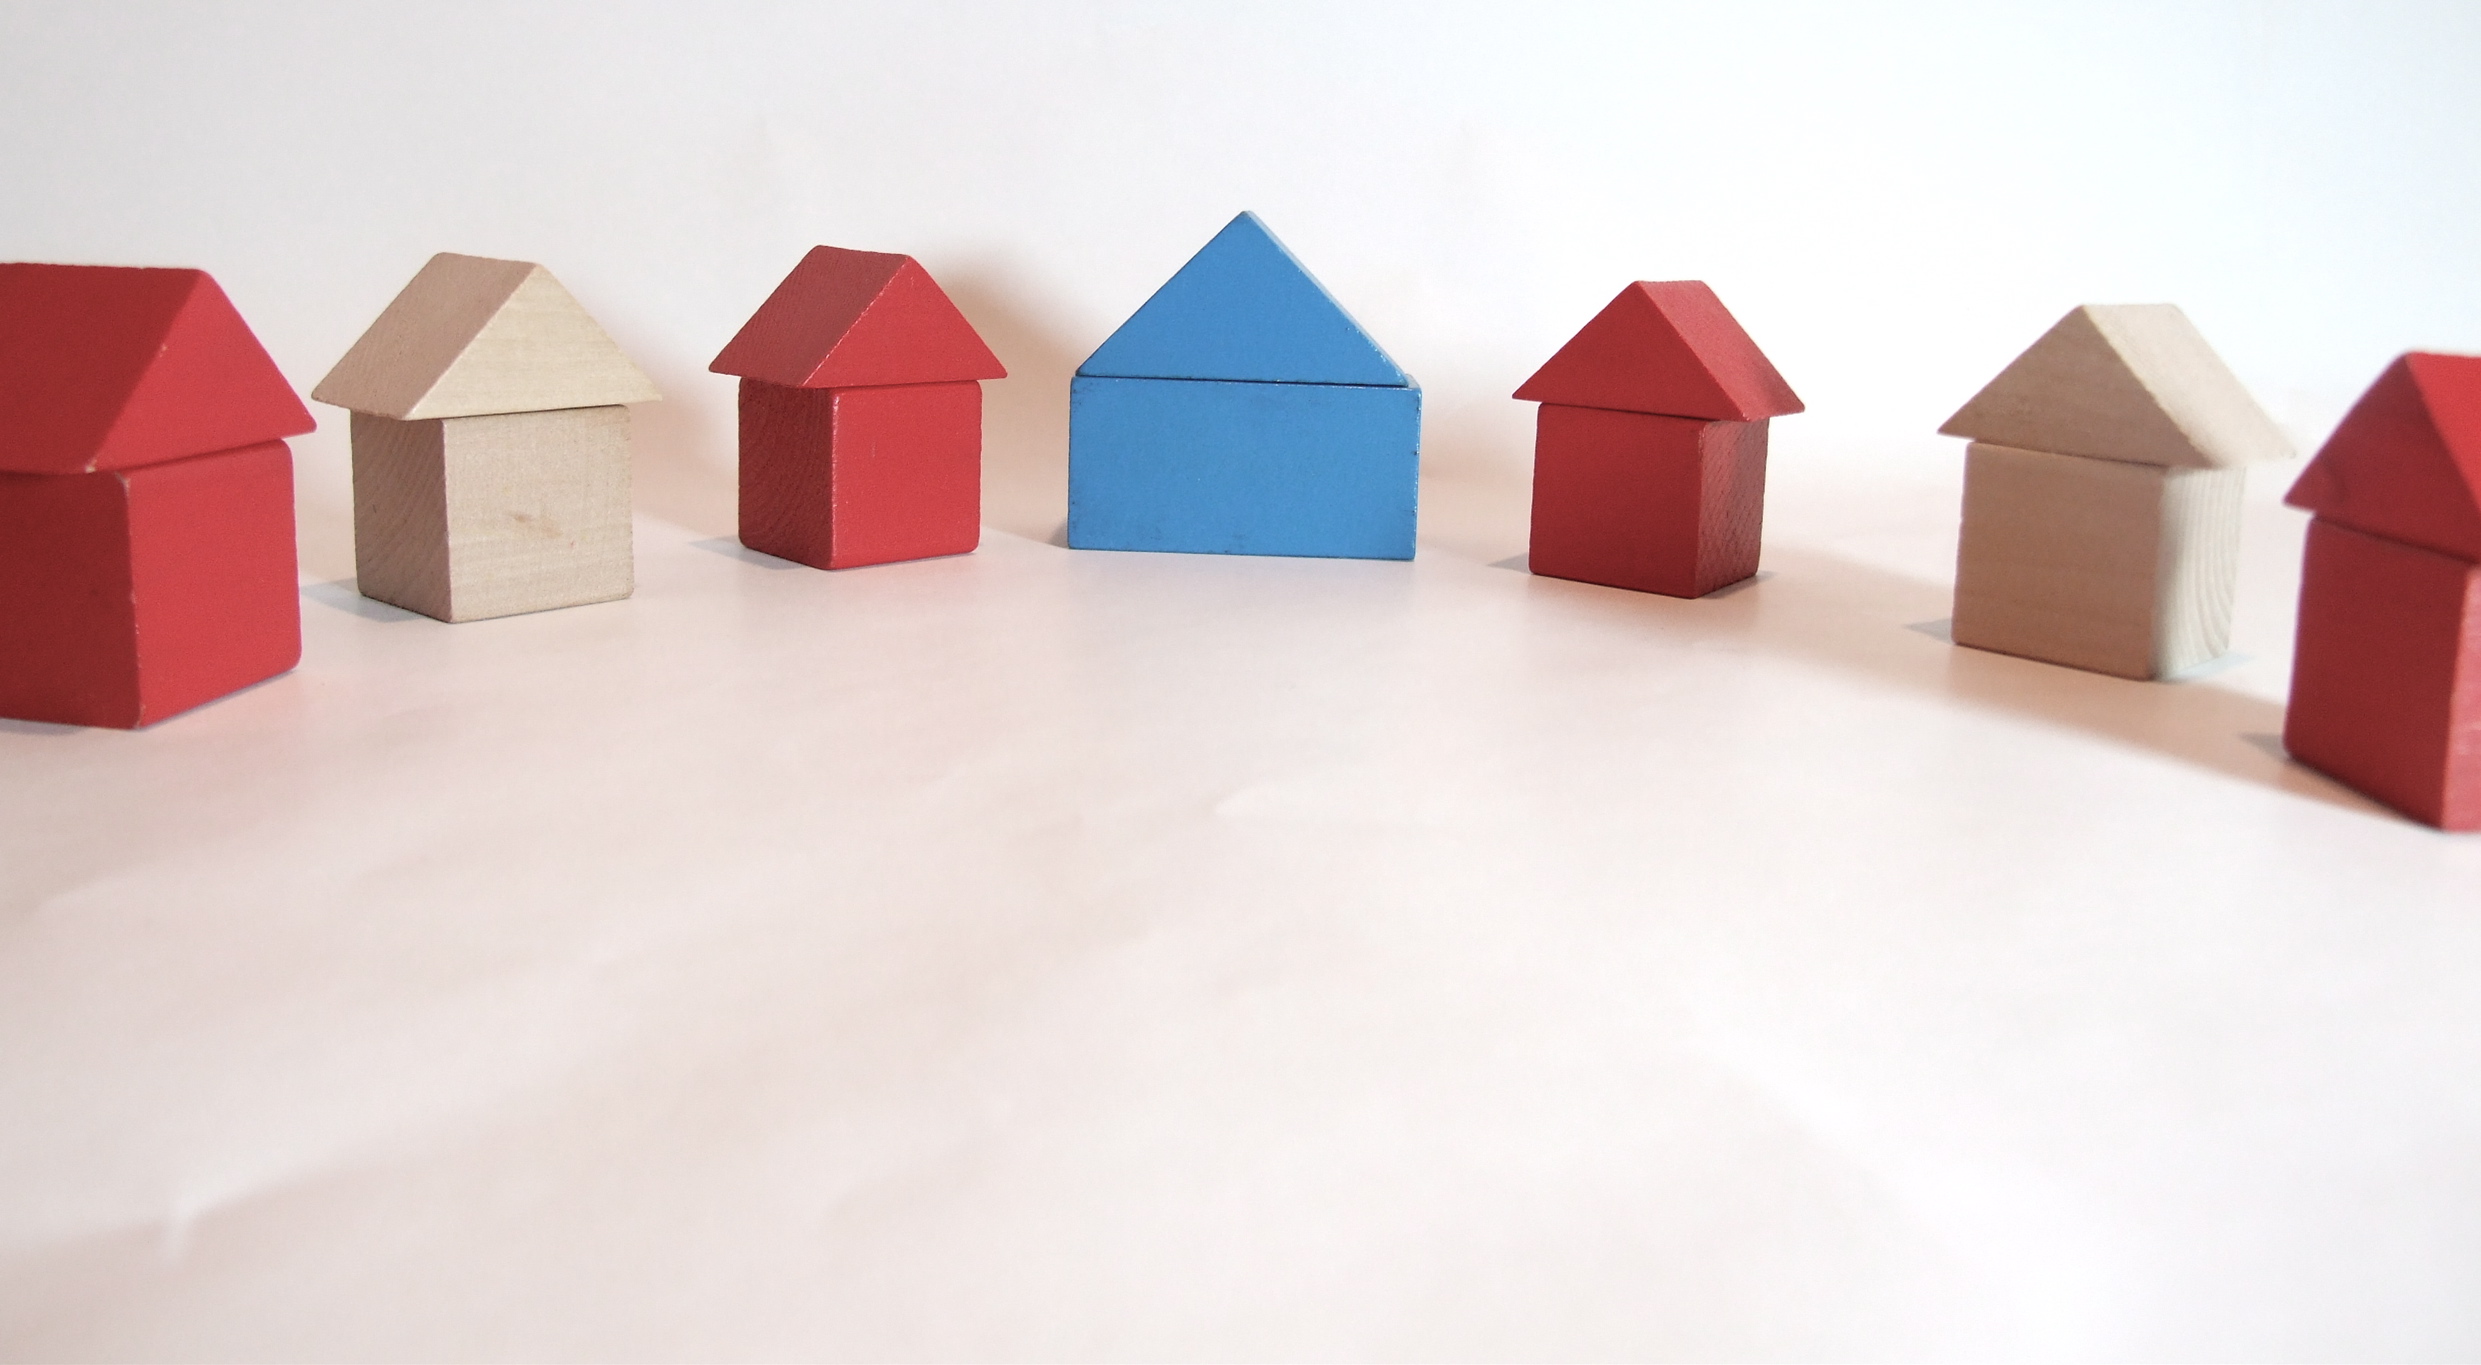 3 wood toy houses on a white background